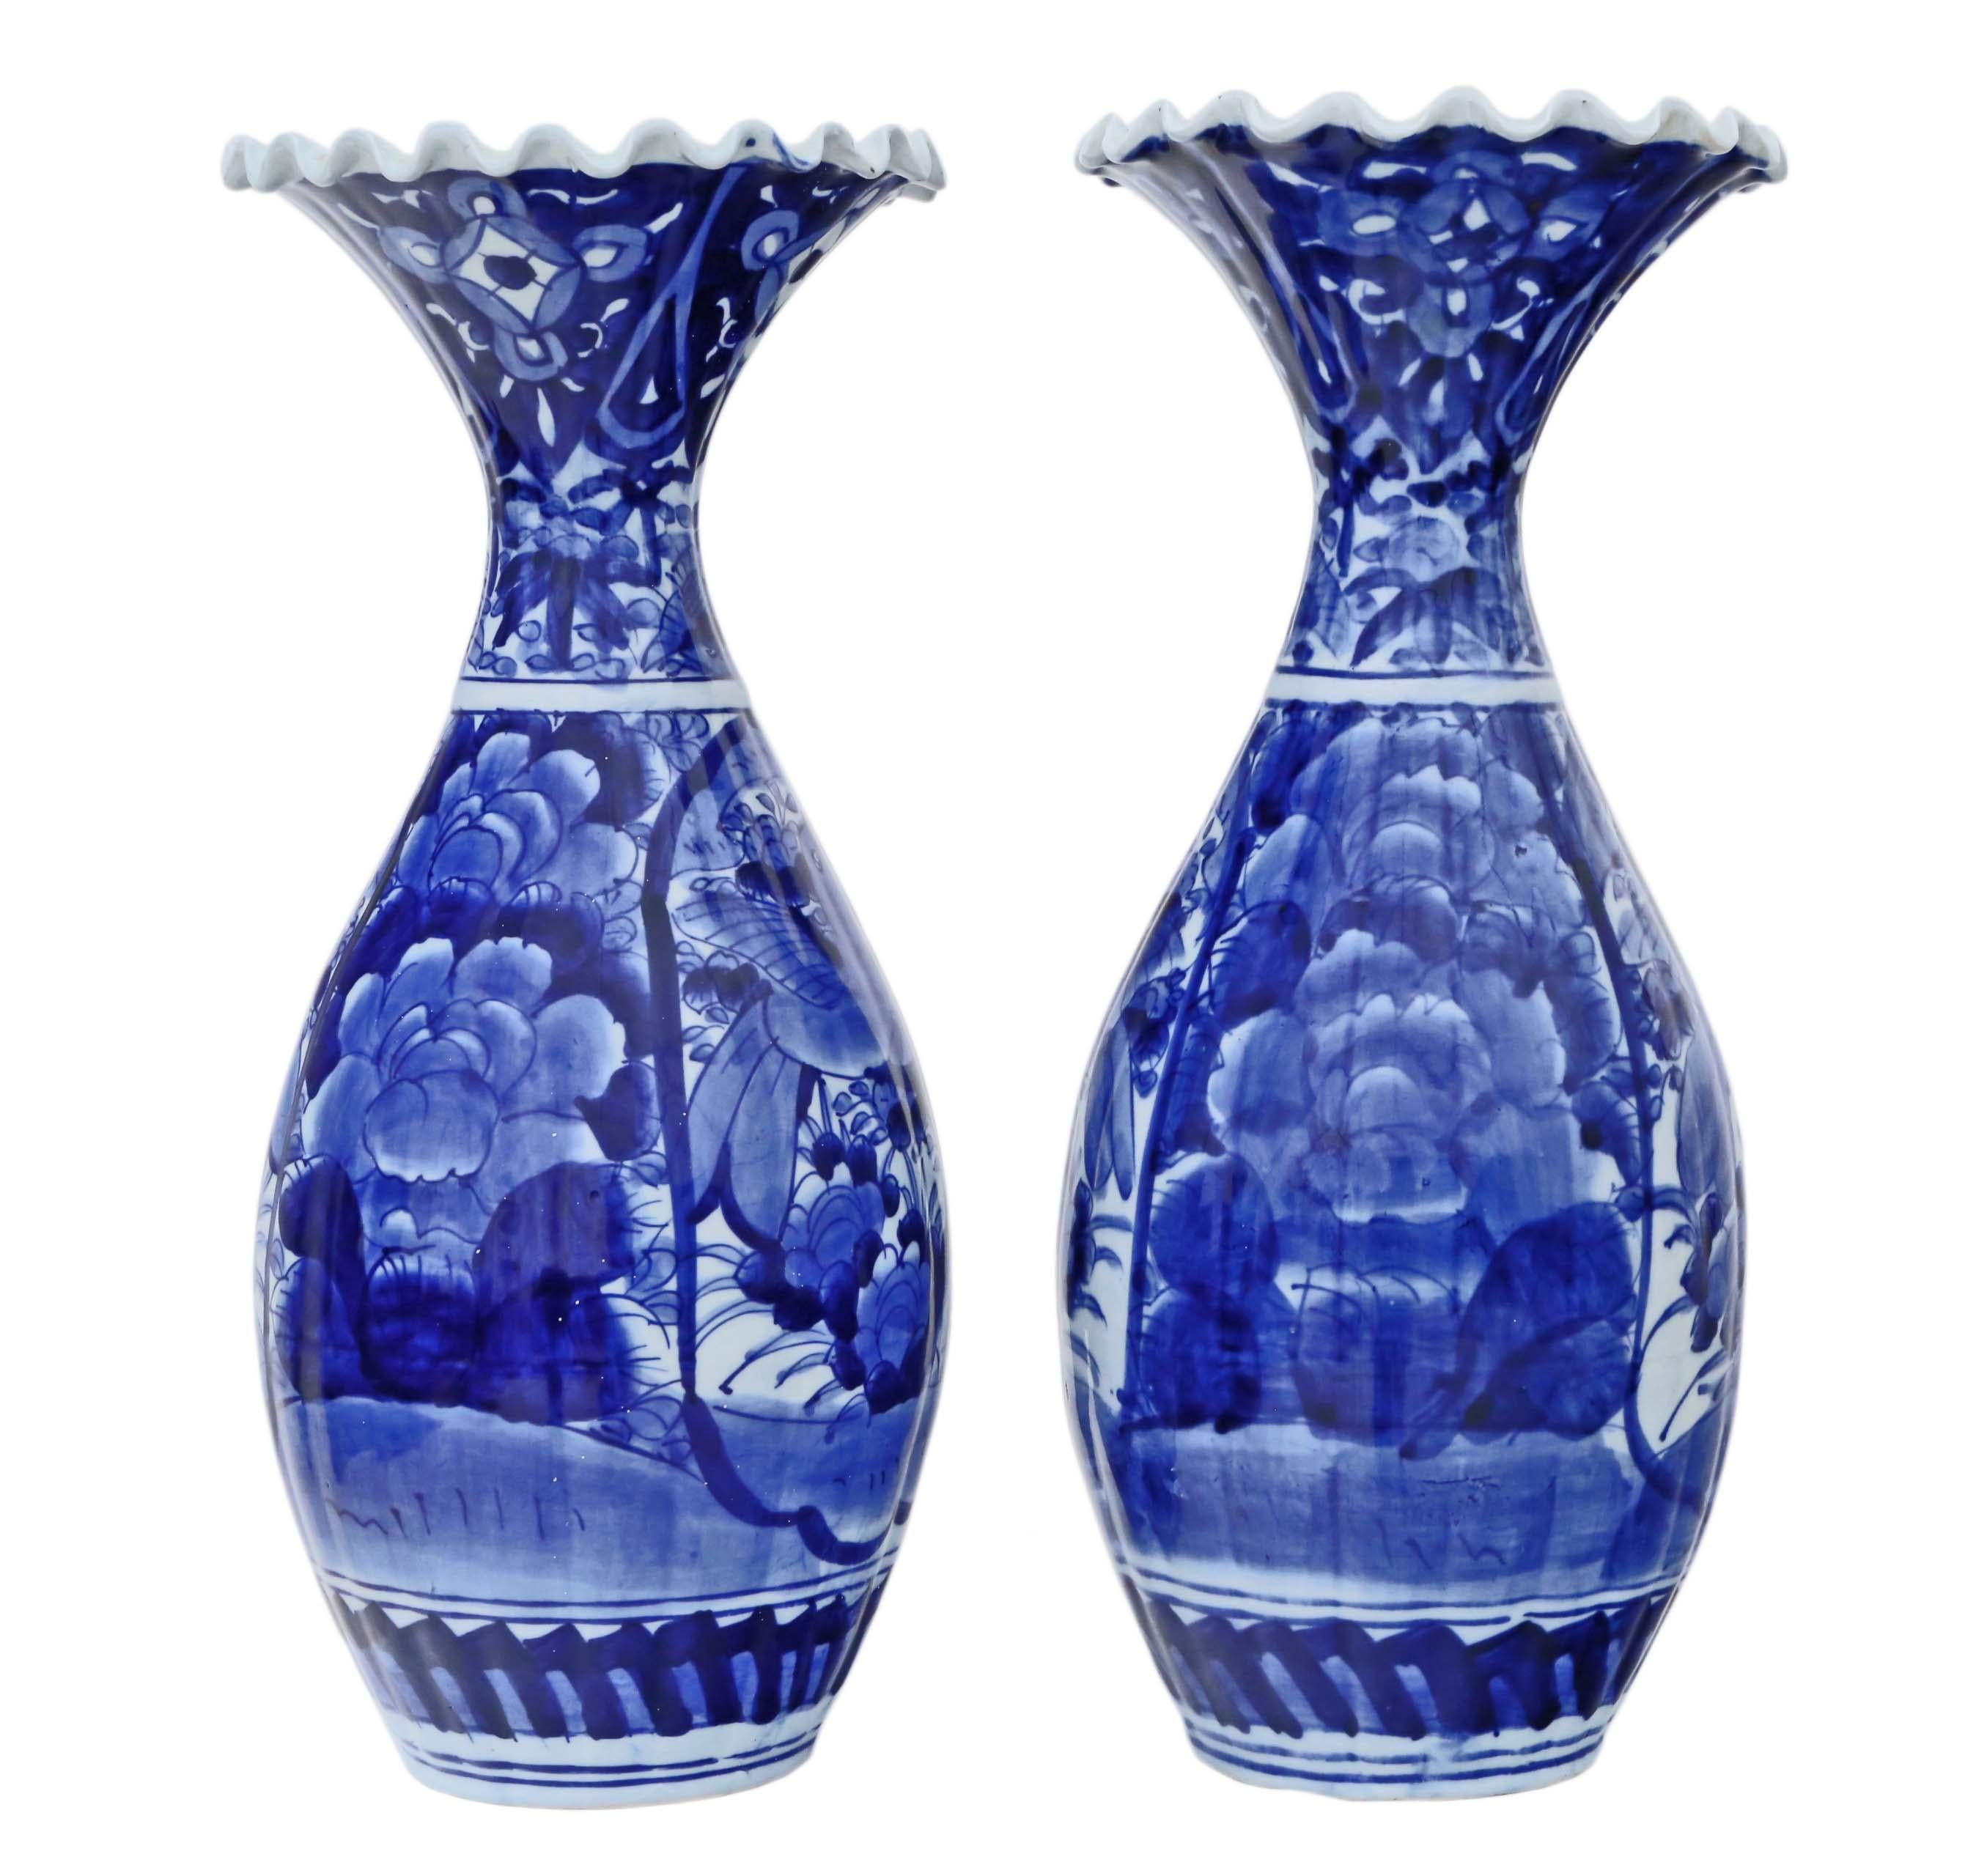 Antique large pair of Japanese Meiji Imari circa 1910 blue and white vases.
These are lovely large quality pieces....a touch of class, with fantastic ribbon rims
Would look amazing in the right location, large enough to make a real